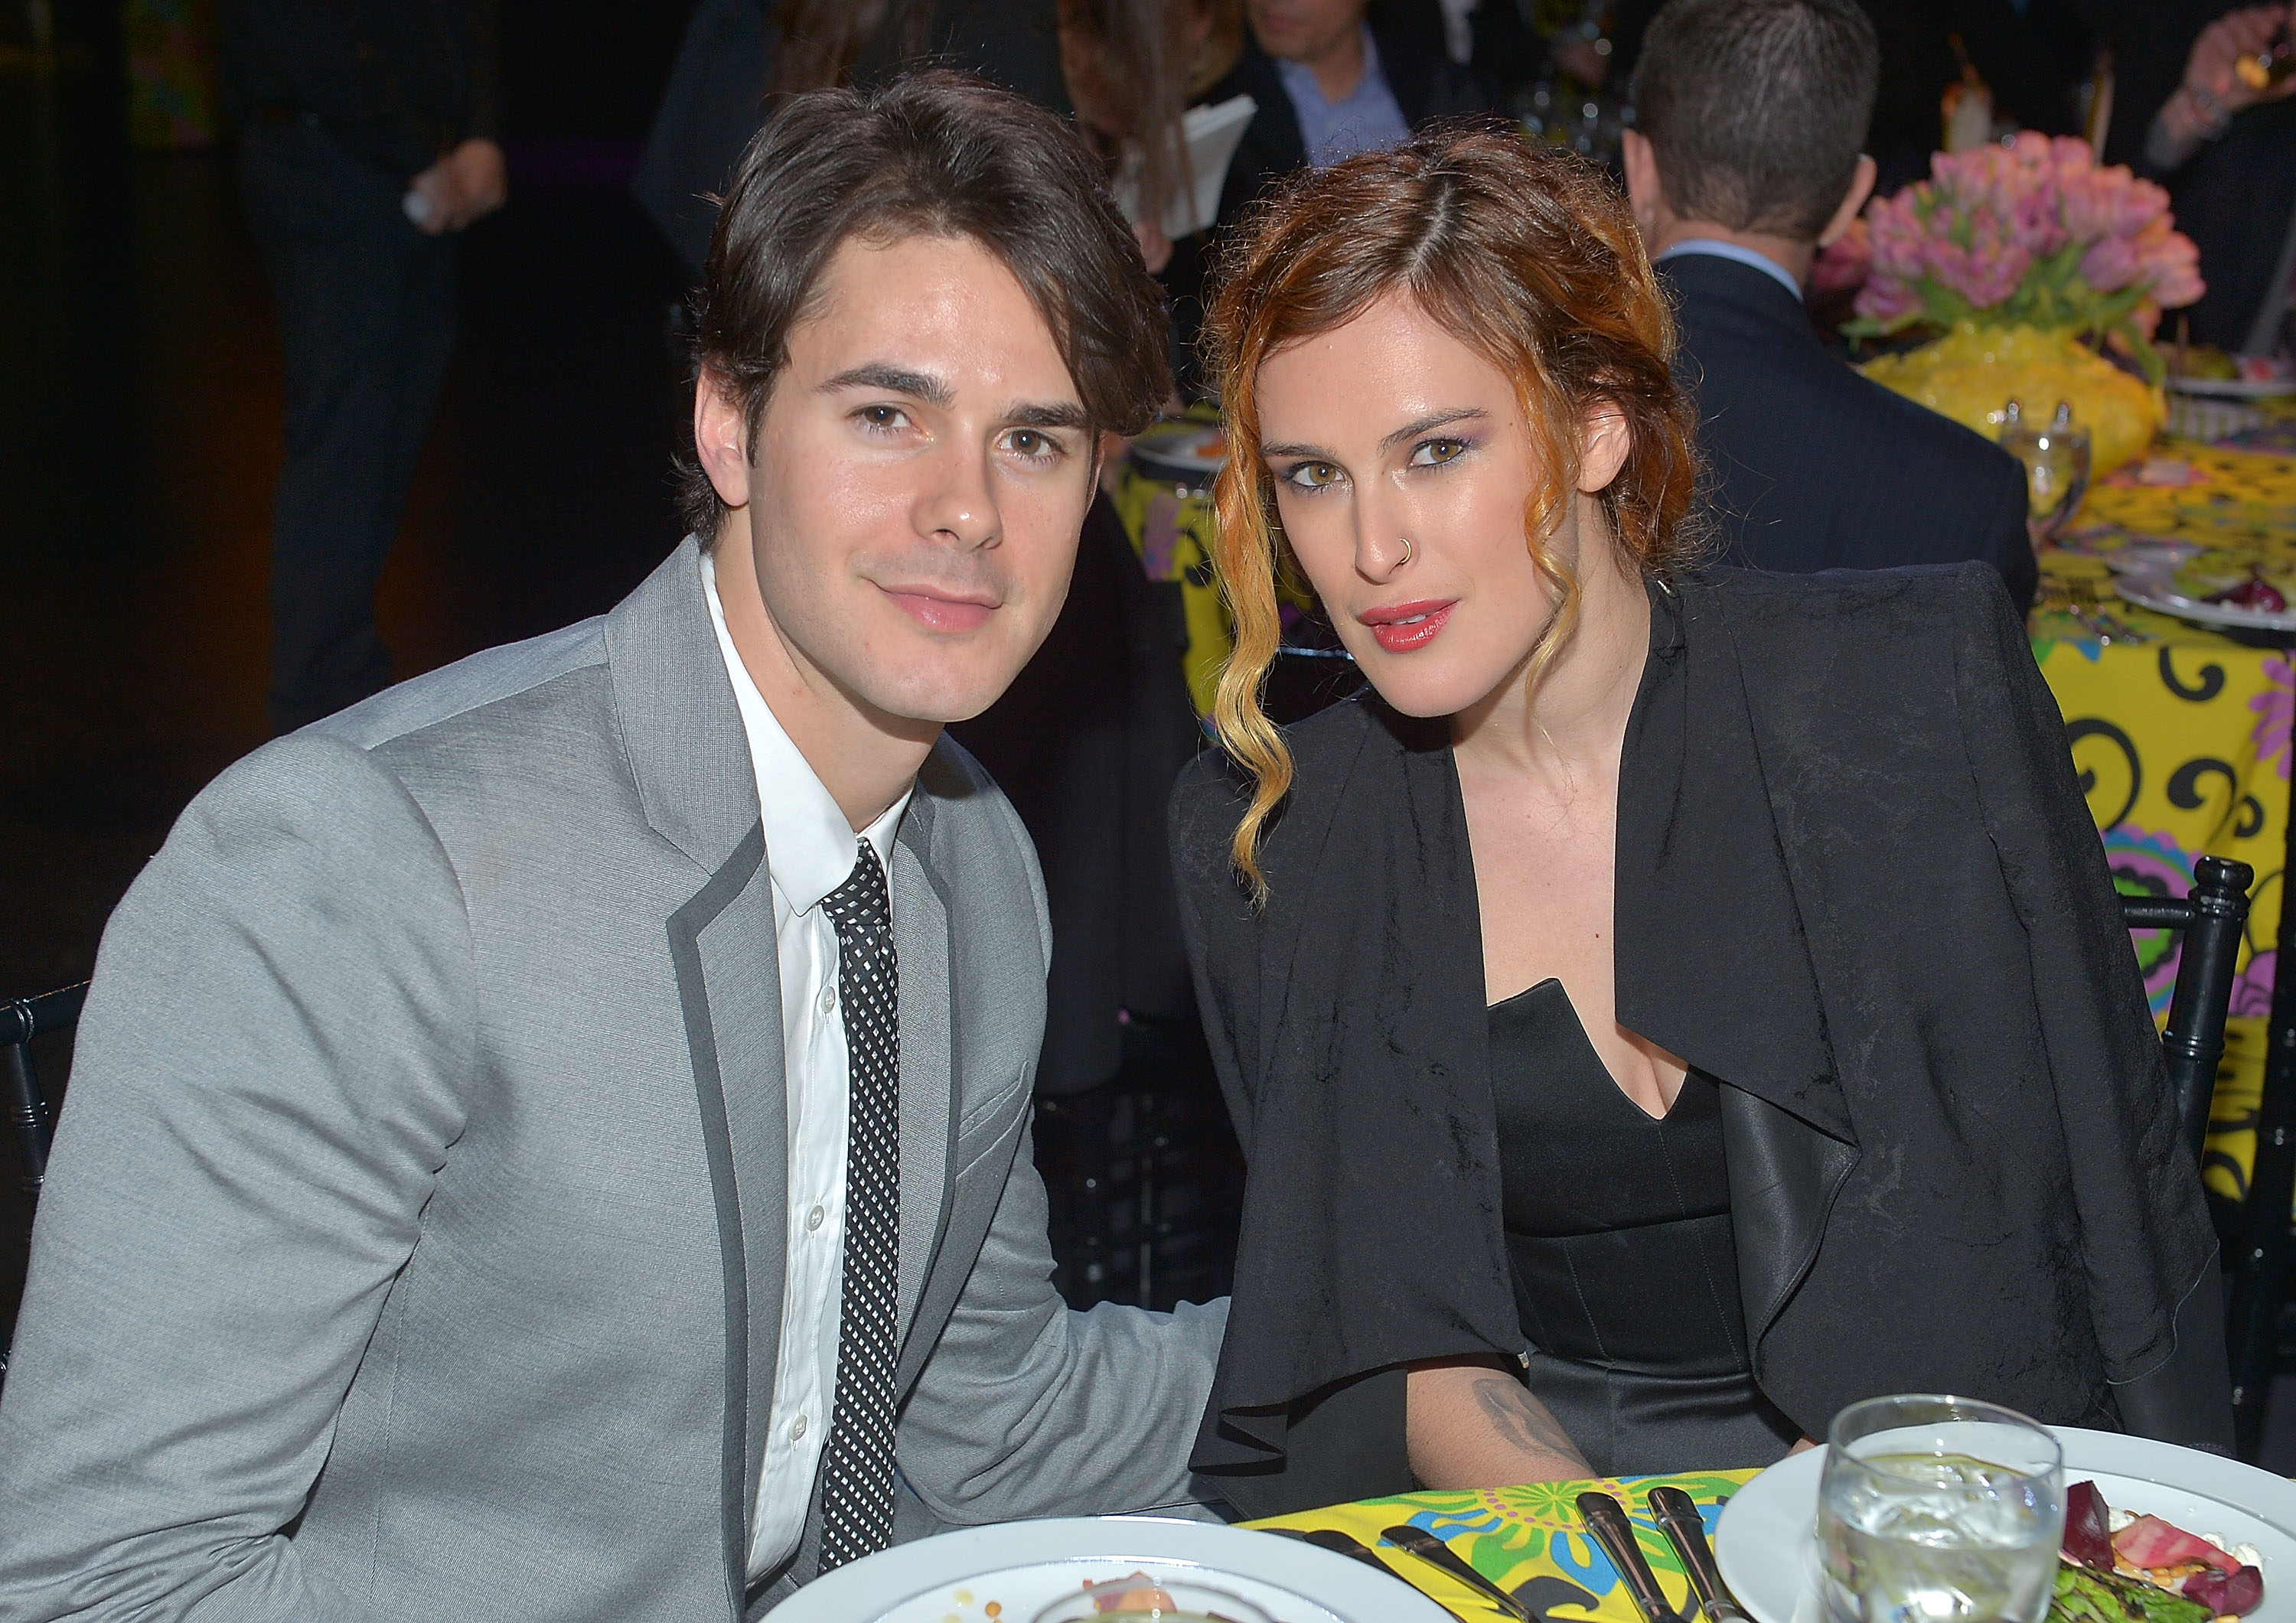 UNIVERSAL CITY, CA - FEBRUARY 09:   Actor Jayson Blair (L) and actress Rumor Willis attend the Family Equality Council LA Awards Dinner at The Globe Theatre at Universal Studios on February 9, 2013 in Universal City, California.  (Photo by Charley Gallay/WireImage)